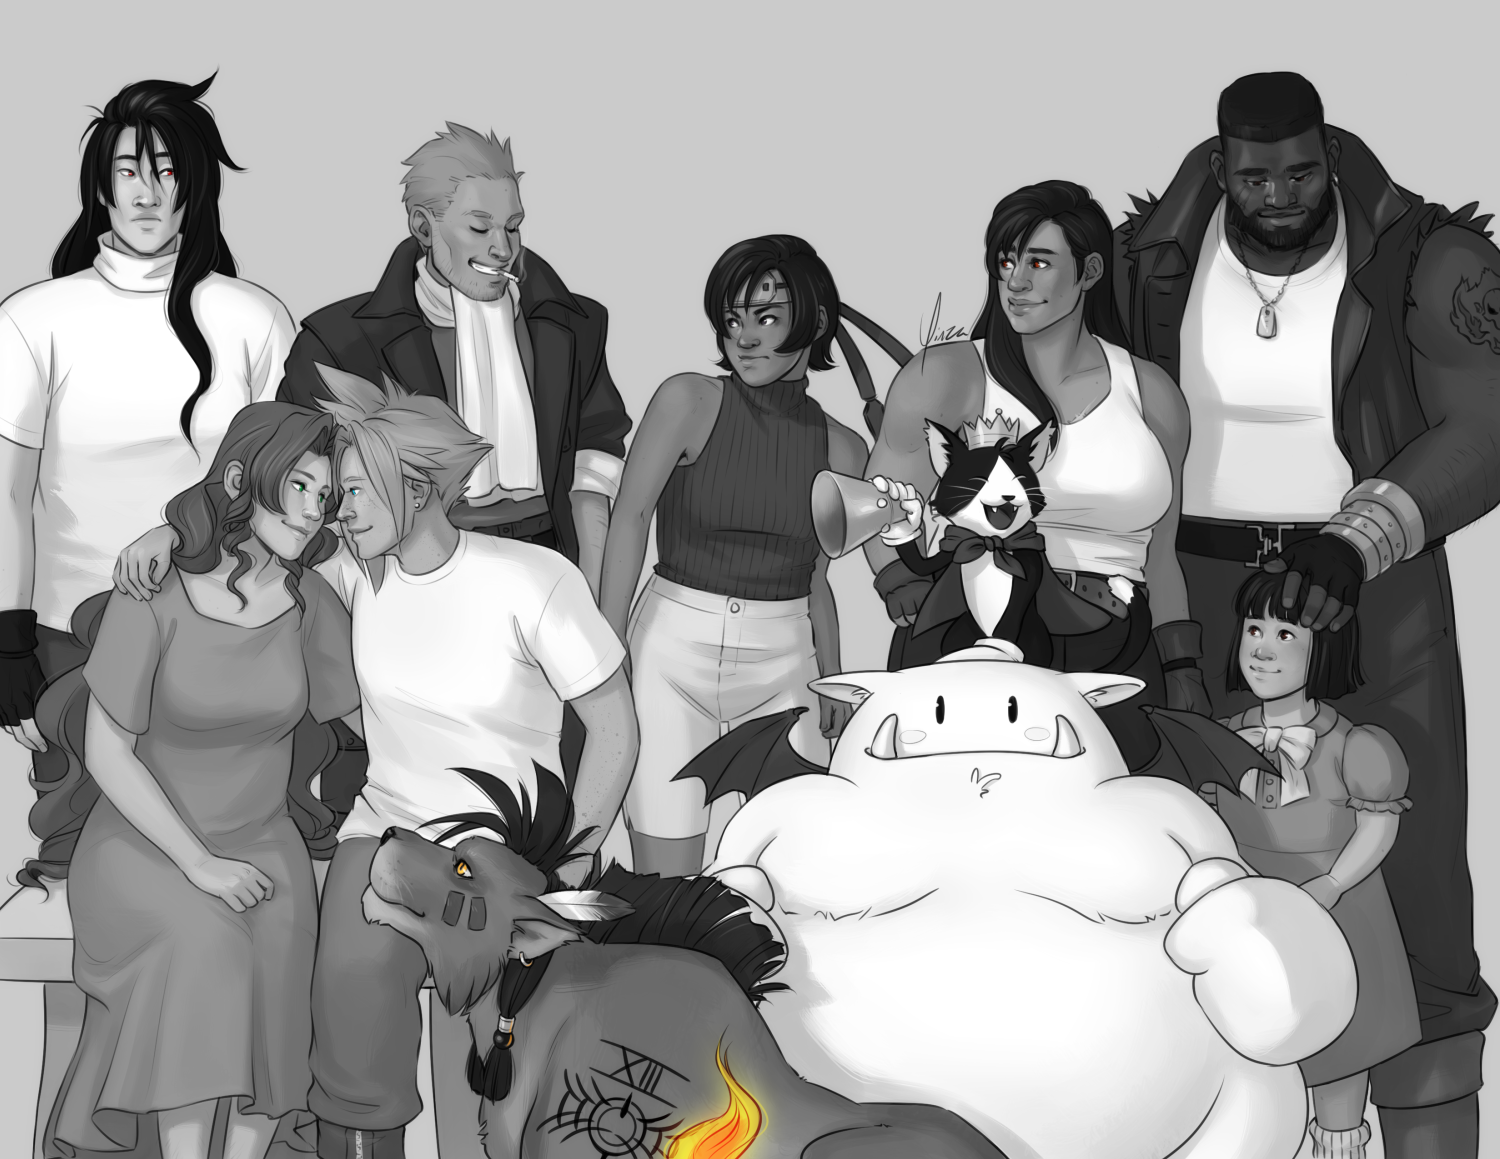 A group drawing of AVALANCHE, done in greyscale with the exception of eye color and Nanaki's tail flame. The first and updated drawing is digital. Standing in the back row, from left to right: Vincent wears a white turtleneck T-shirt and black fingerless gloves. He is looking to his left with raised eyebrows. Cid wears his canon outfit and grins around a cigarette, his eyes closed. Yuffie wears her headband, an uncropped sleeveless turtleneck knit, and capri shorts. She leans away from Cid, looking at him with an irritated expression. Tifa wears a white tank top, black pants, and fingerless gloves, and looks towards Yuffie in amusement. Barret stands slightly behind her wearing his OG outfit with the addition of a white shirt. His left hand rests atop Marlene's head and he looks down at her with a fond expression. In the front row, from left to right: Aeris and Cloud are seated on a bench together. Aeris wears a plain short-sleeve, ankle-length dress, and has her hair loose. Cloud wears a white T-shirt over his pants and boots. He has his right arm around Aeris's shoulder and she has her left behind his back, and they are leaning into each other and smiling. Nanaki is lying on the ground in front of Cloud, looking up at them fondly. Cait Sith sits atop his moogle holding his megaphone, and he grins down at Marlene. Marlene stands slightly behind him and in front of Barret, looking back at Cait Sith with a shy smile.